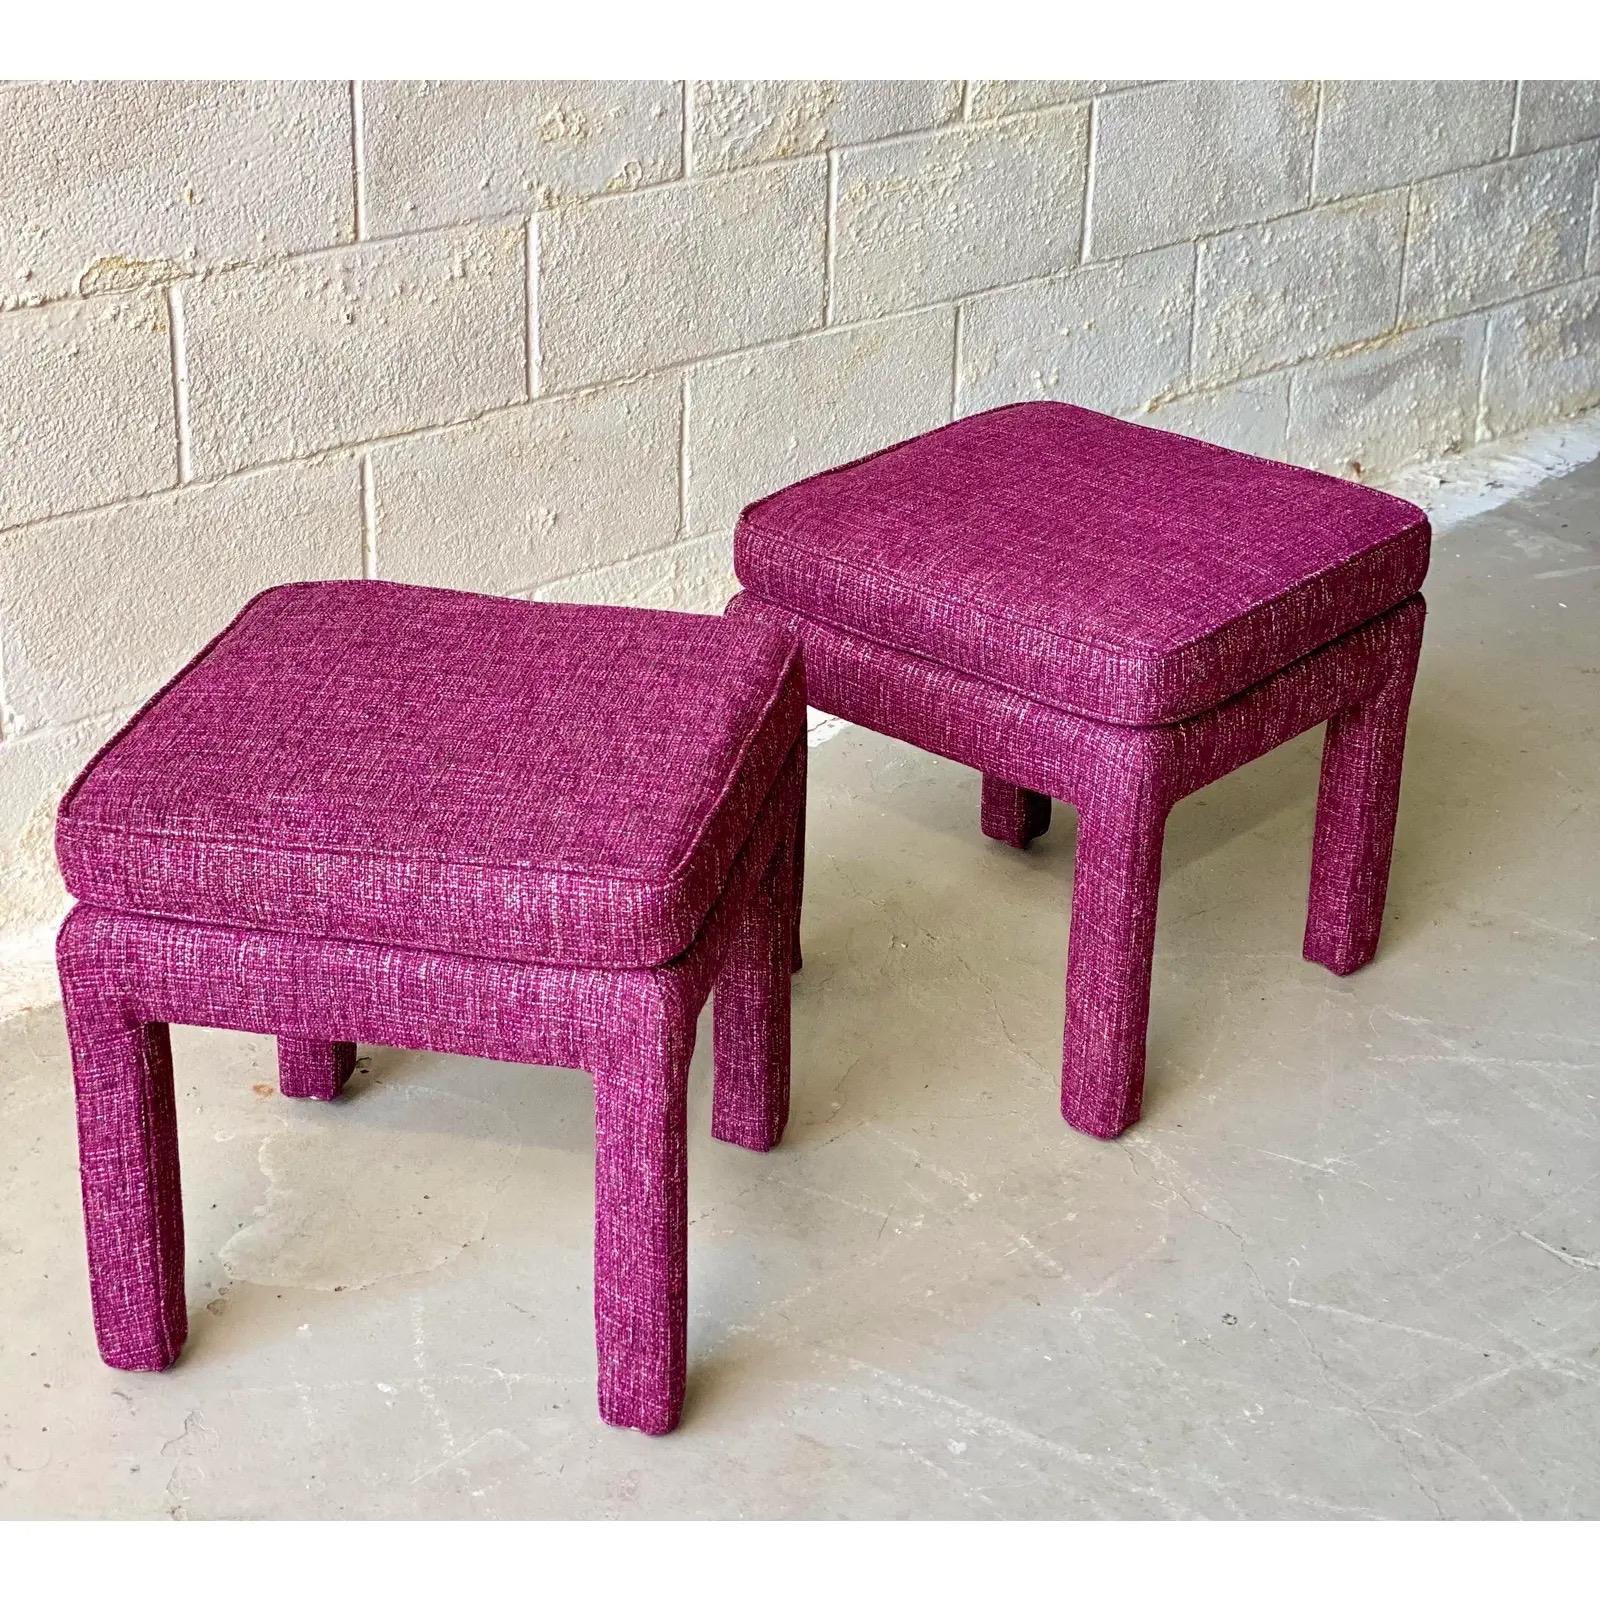 We are very pleased to offer a chic, vintage pair of Milo Baughman style ottomans, circa the 1970s. Layer a space or add extra seating with these eye-catching ottomans wrapped in a new rich, tweed magenta color fabric. In excellent condition and